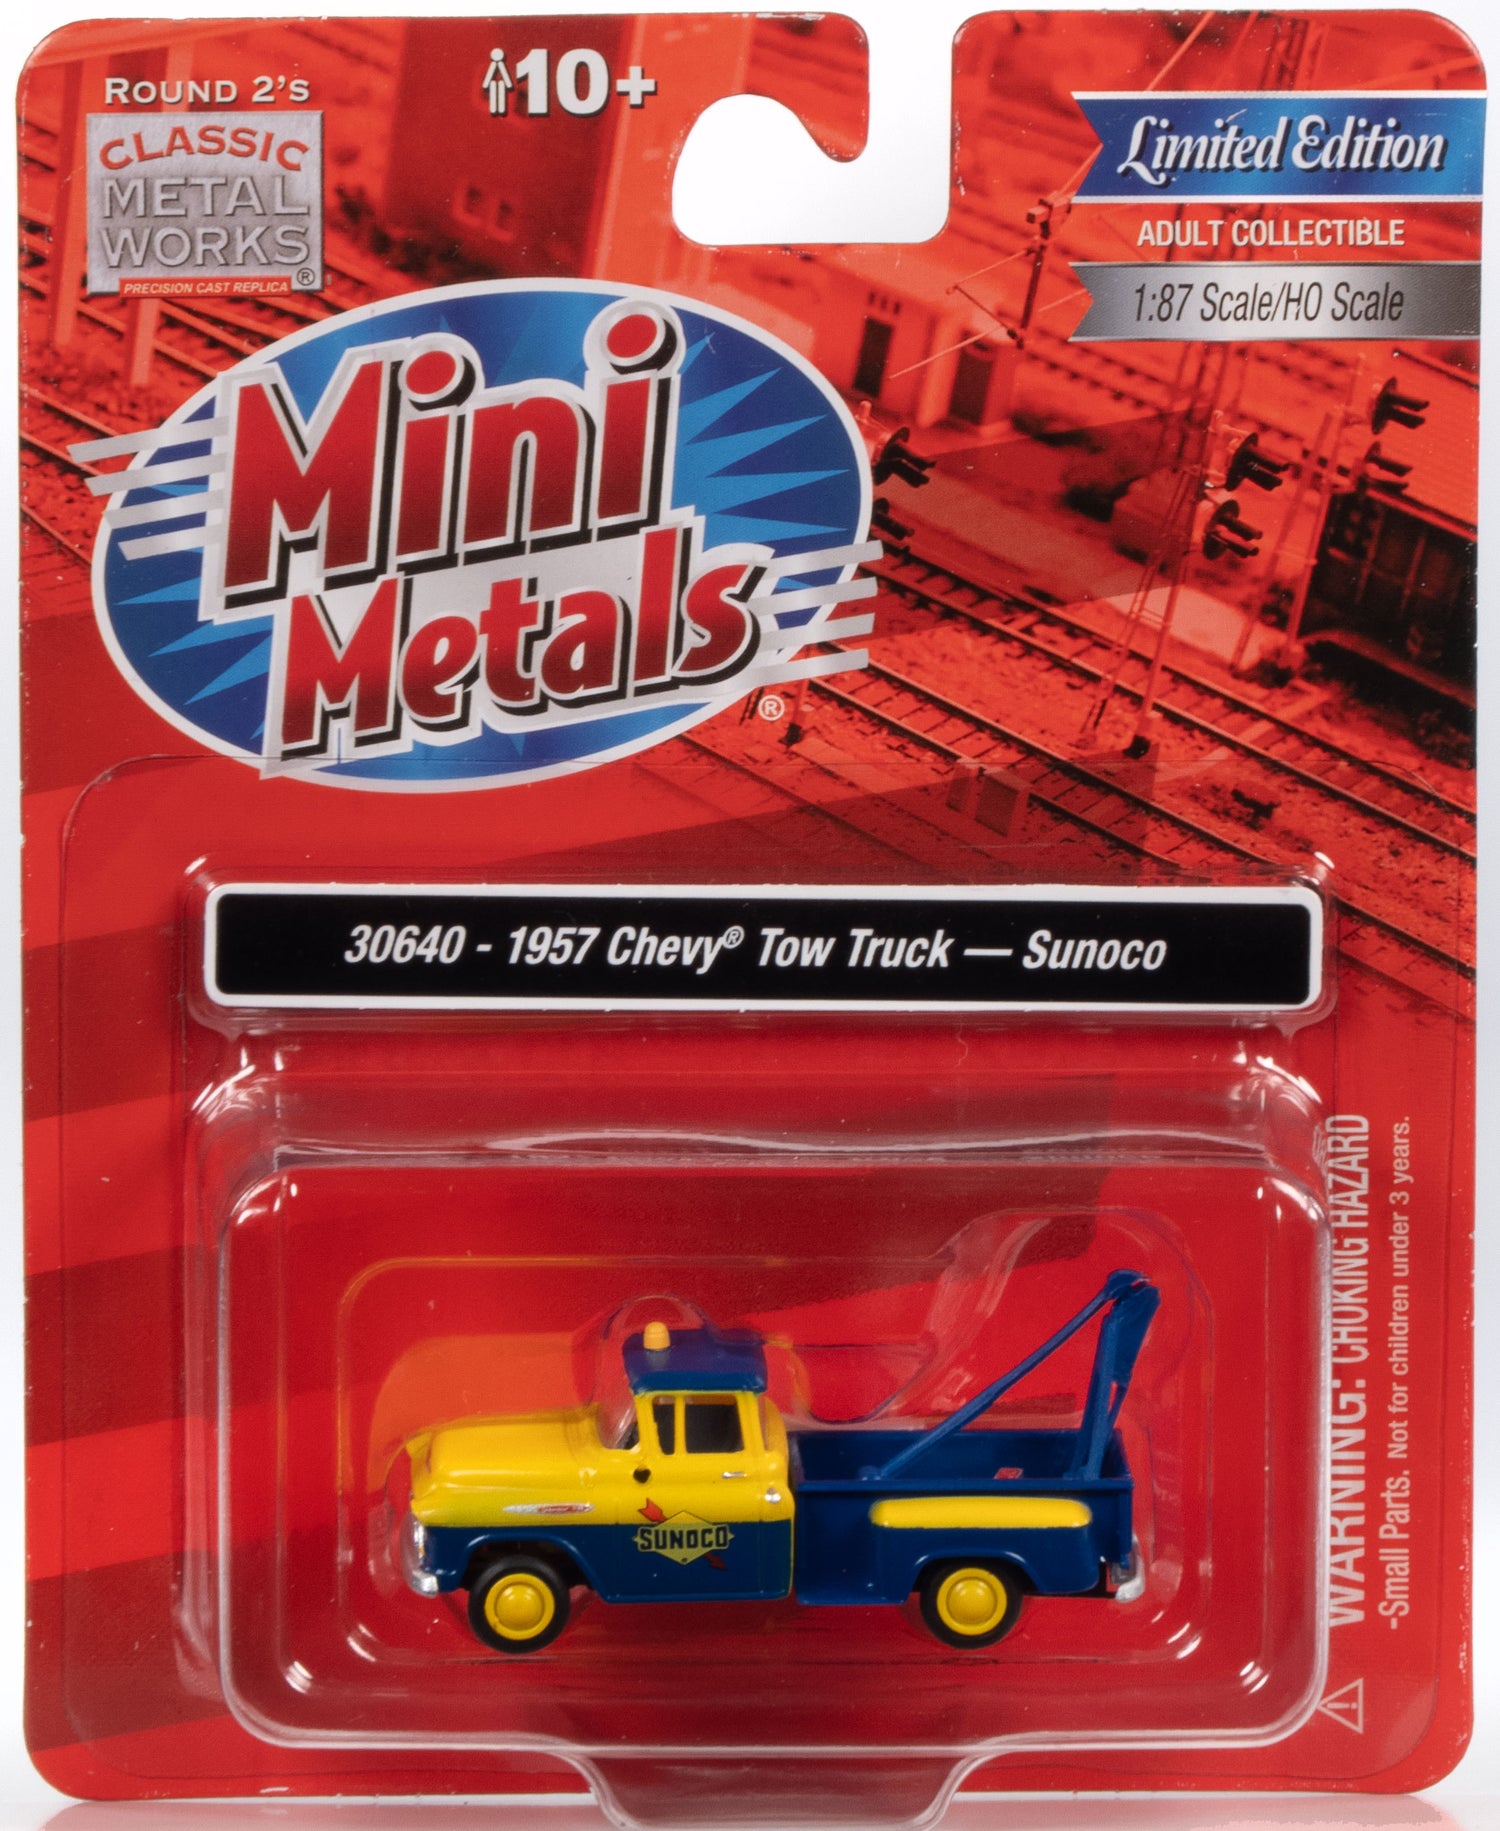 Classic Metal Works 1957 Chevy Pickup Stepside Tow Truck Sunoco 1:87 HO Scale